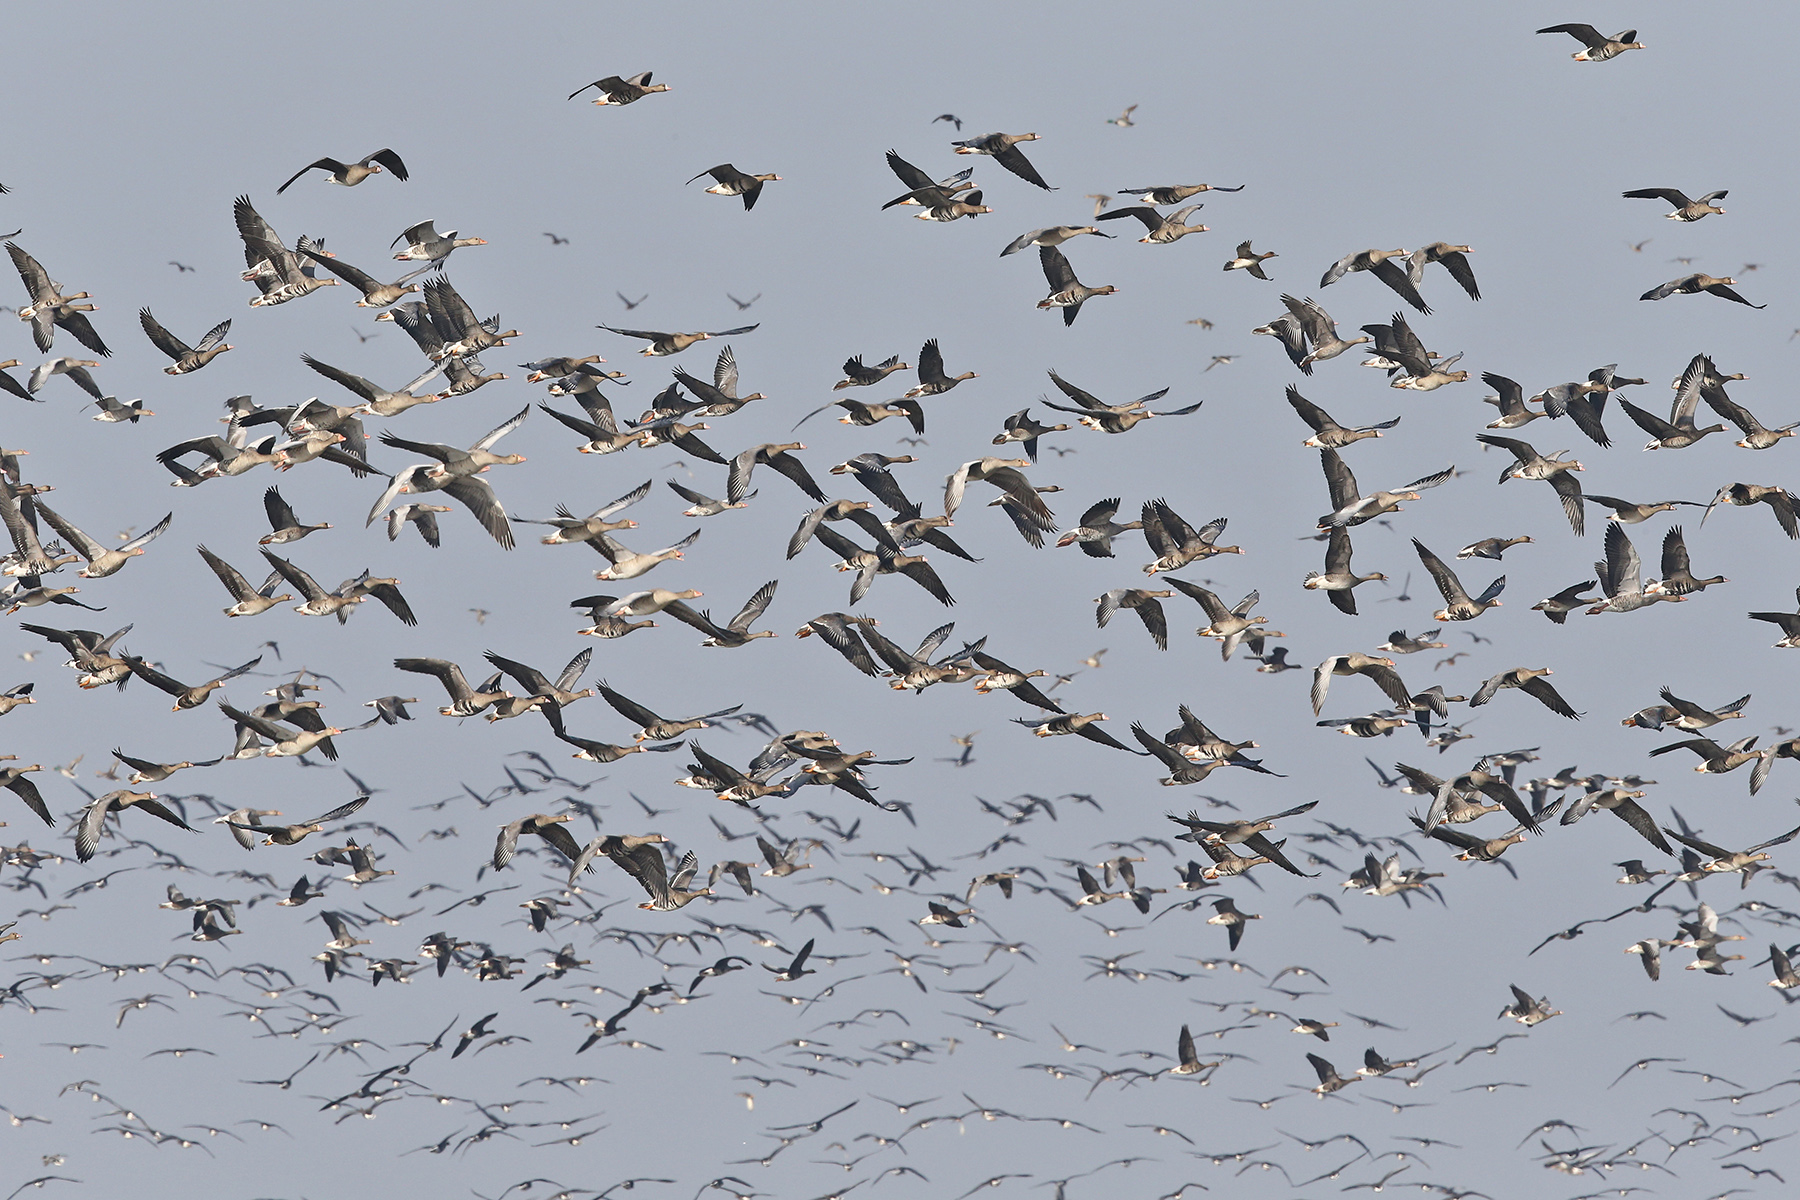 Greater White-fronted Geese in Hungary (image by János Oláh)